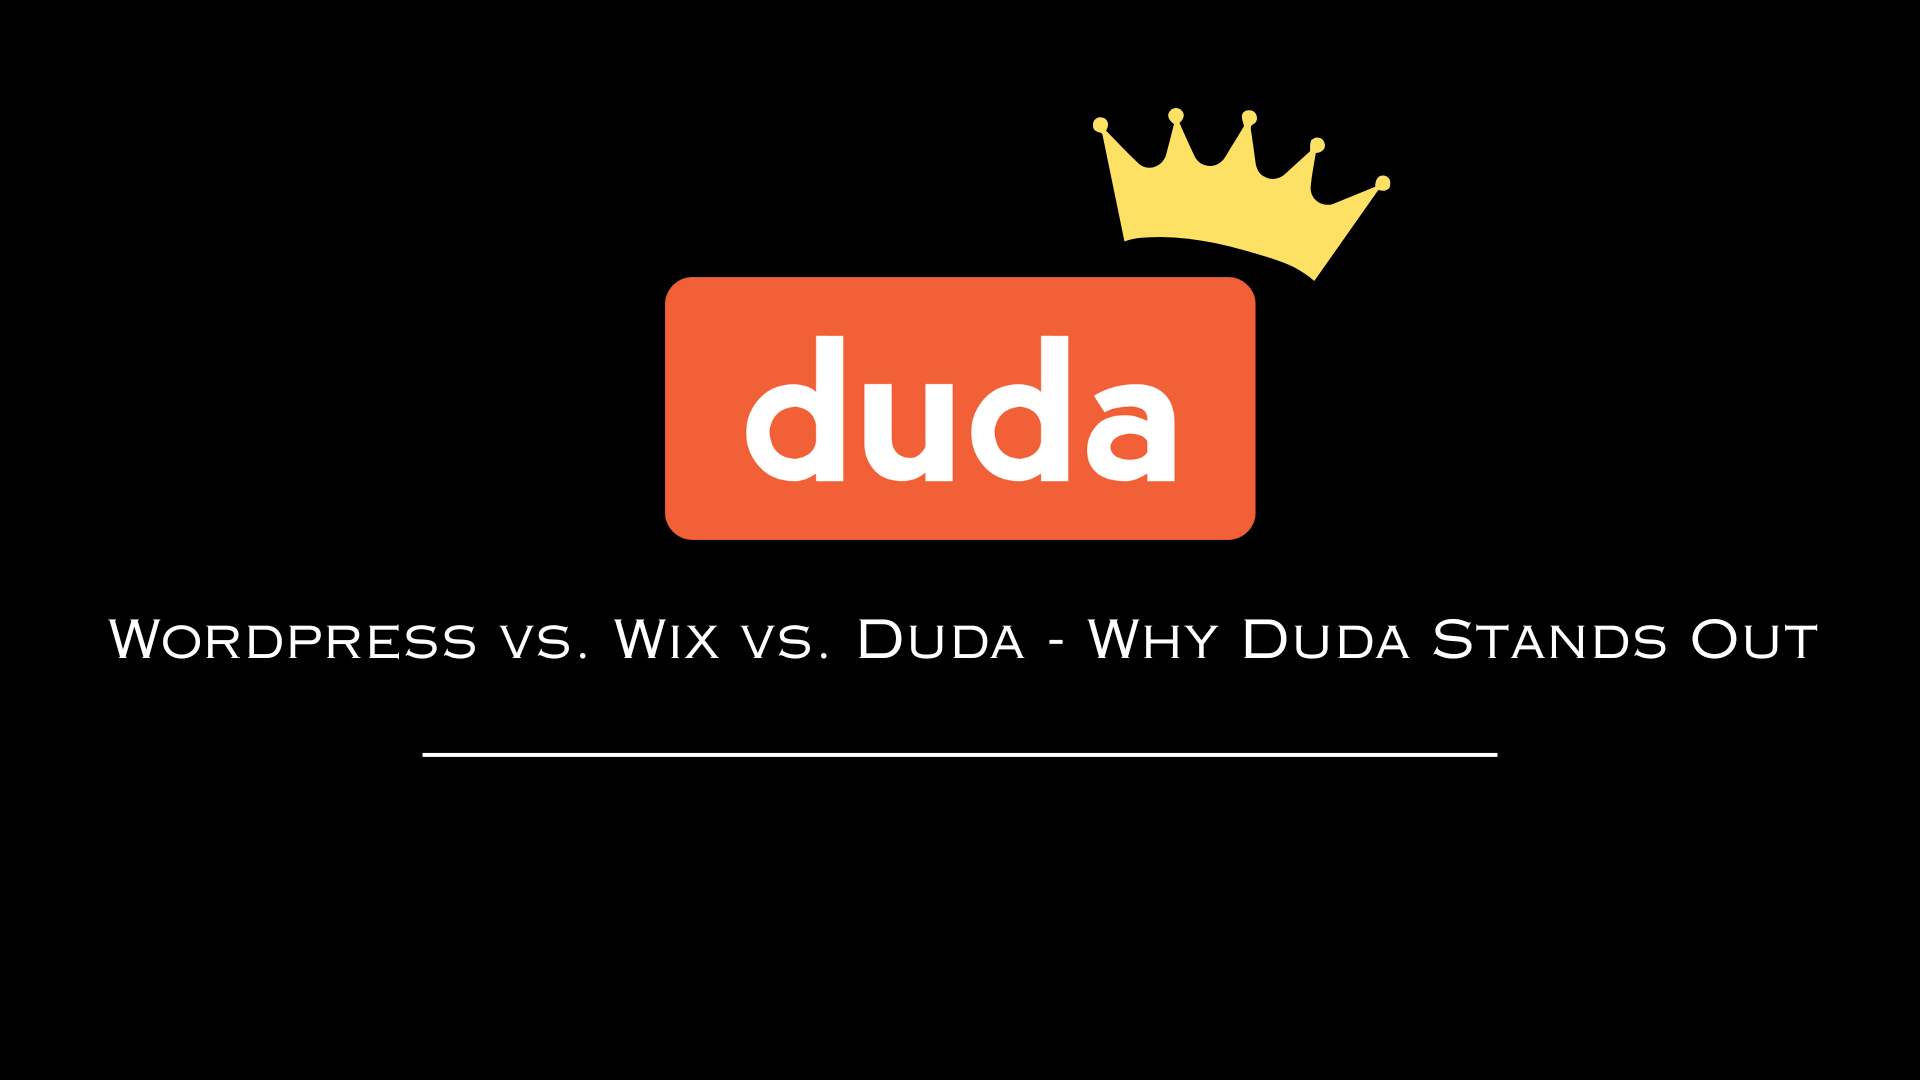 Wordpress vs. Wix vs. Duda - Why Duda Stands Out